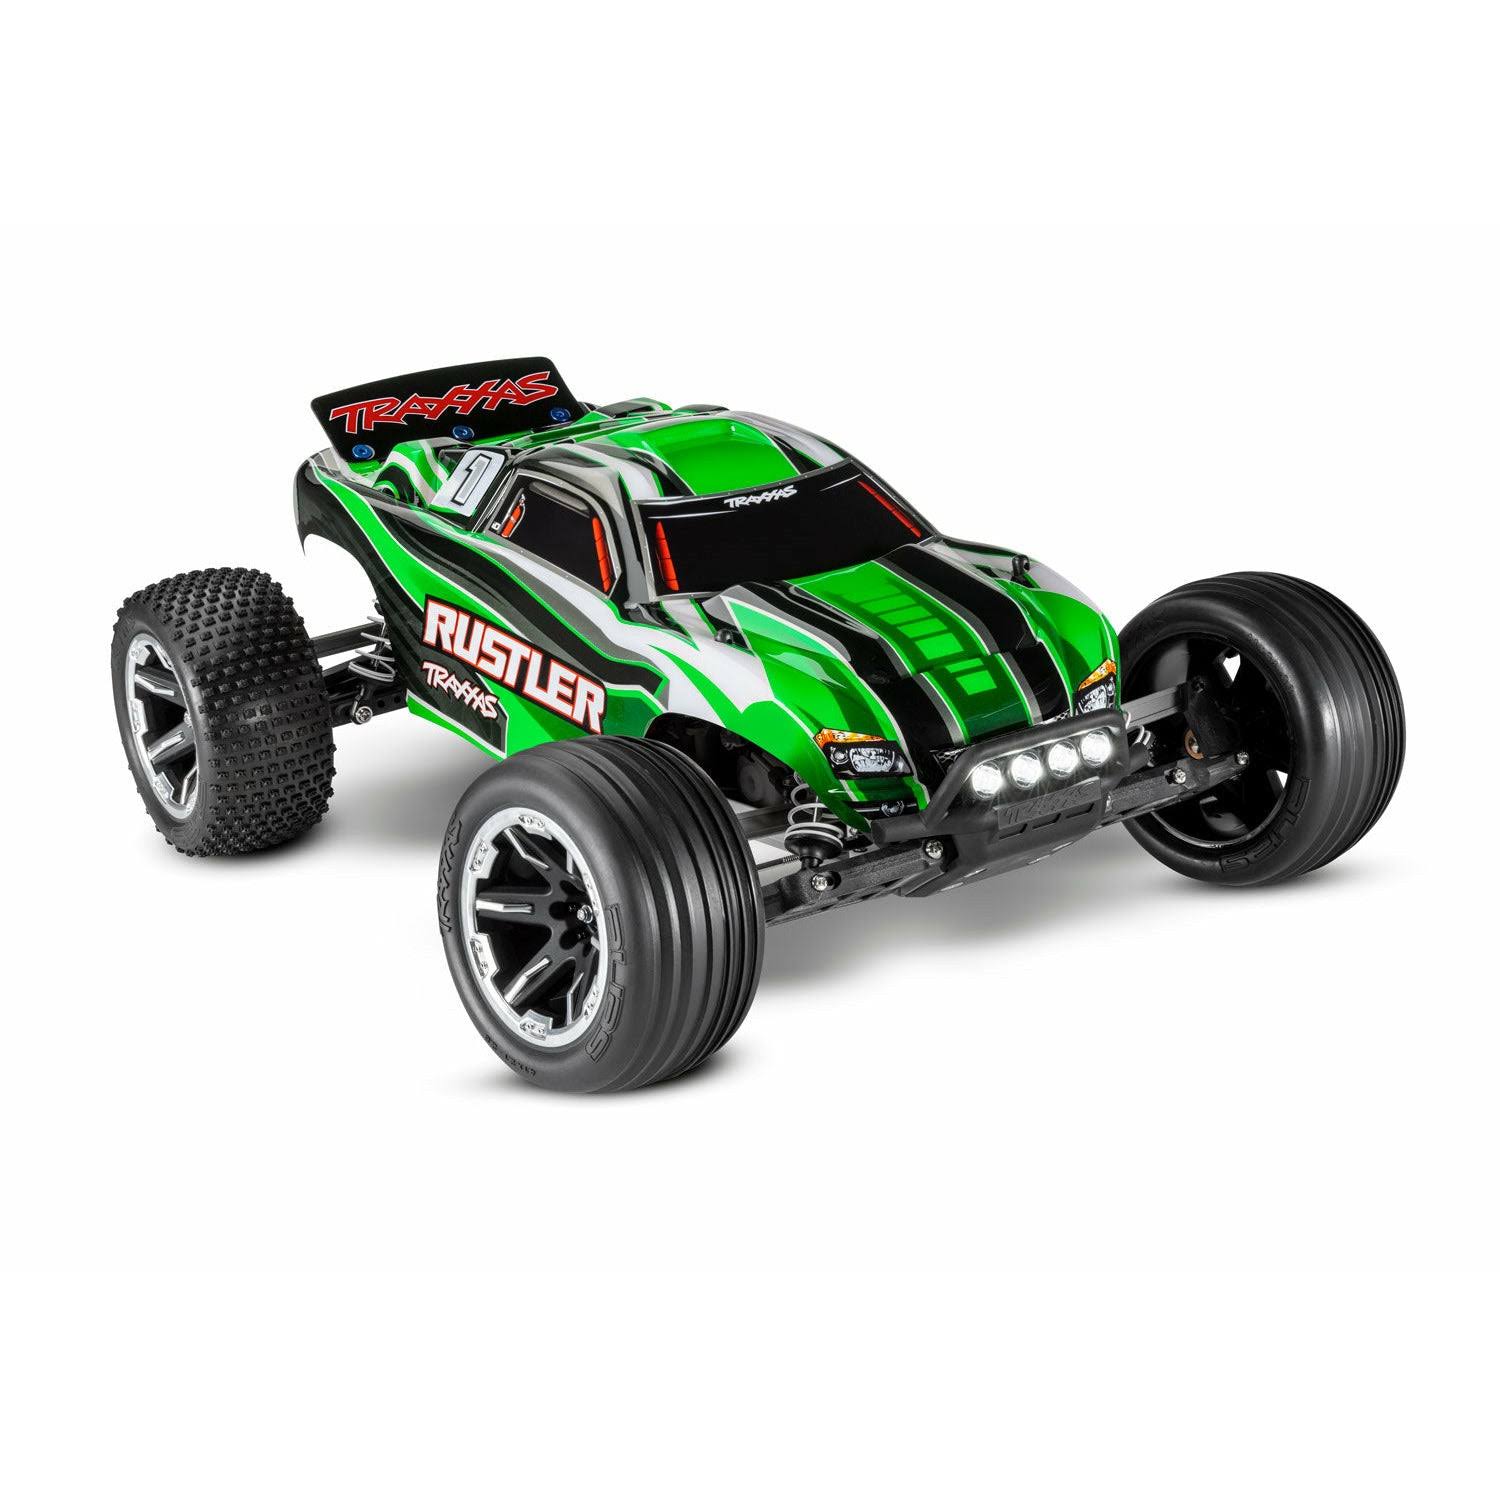 Traxxas 1/10 Rustler 2WD Stadium Truck, RTR with Led Lights Green